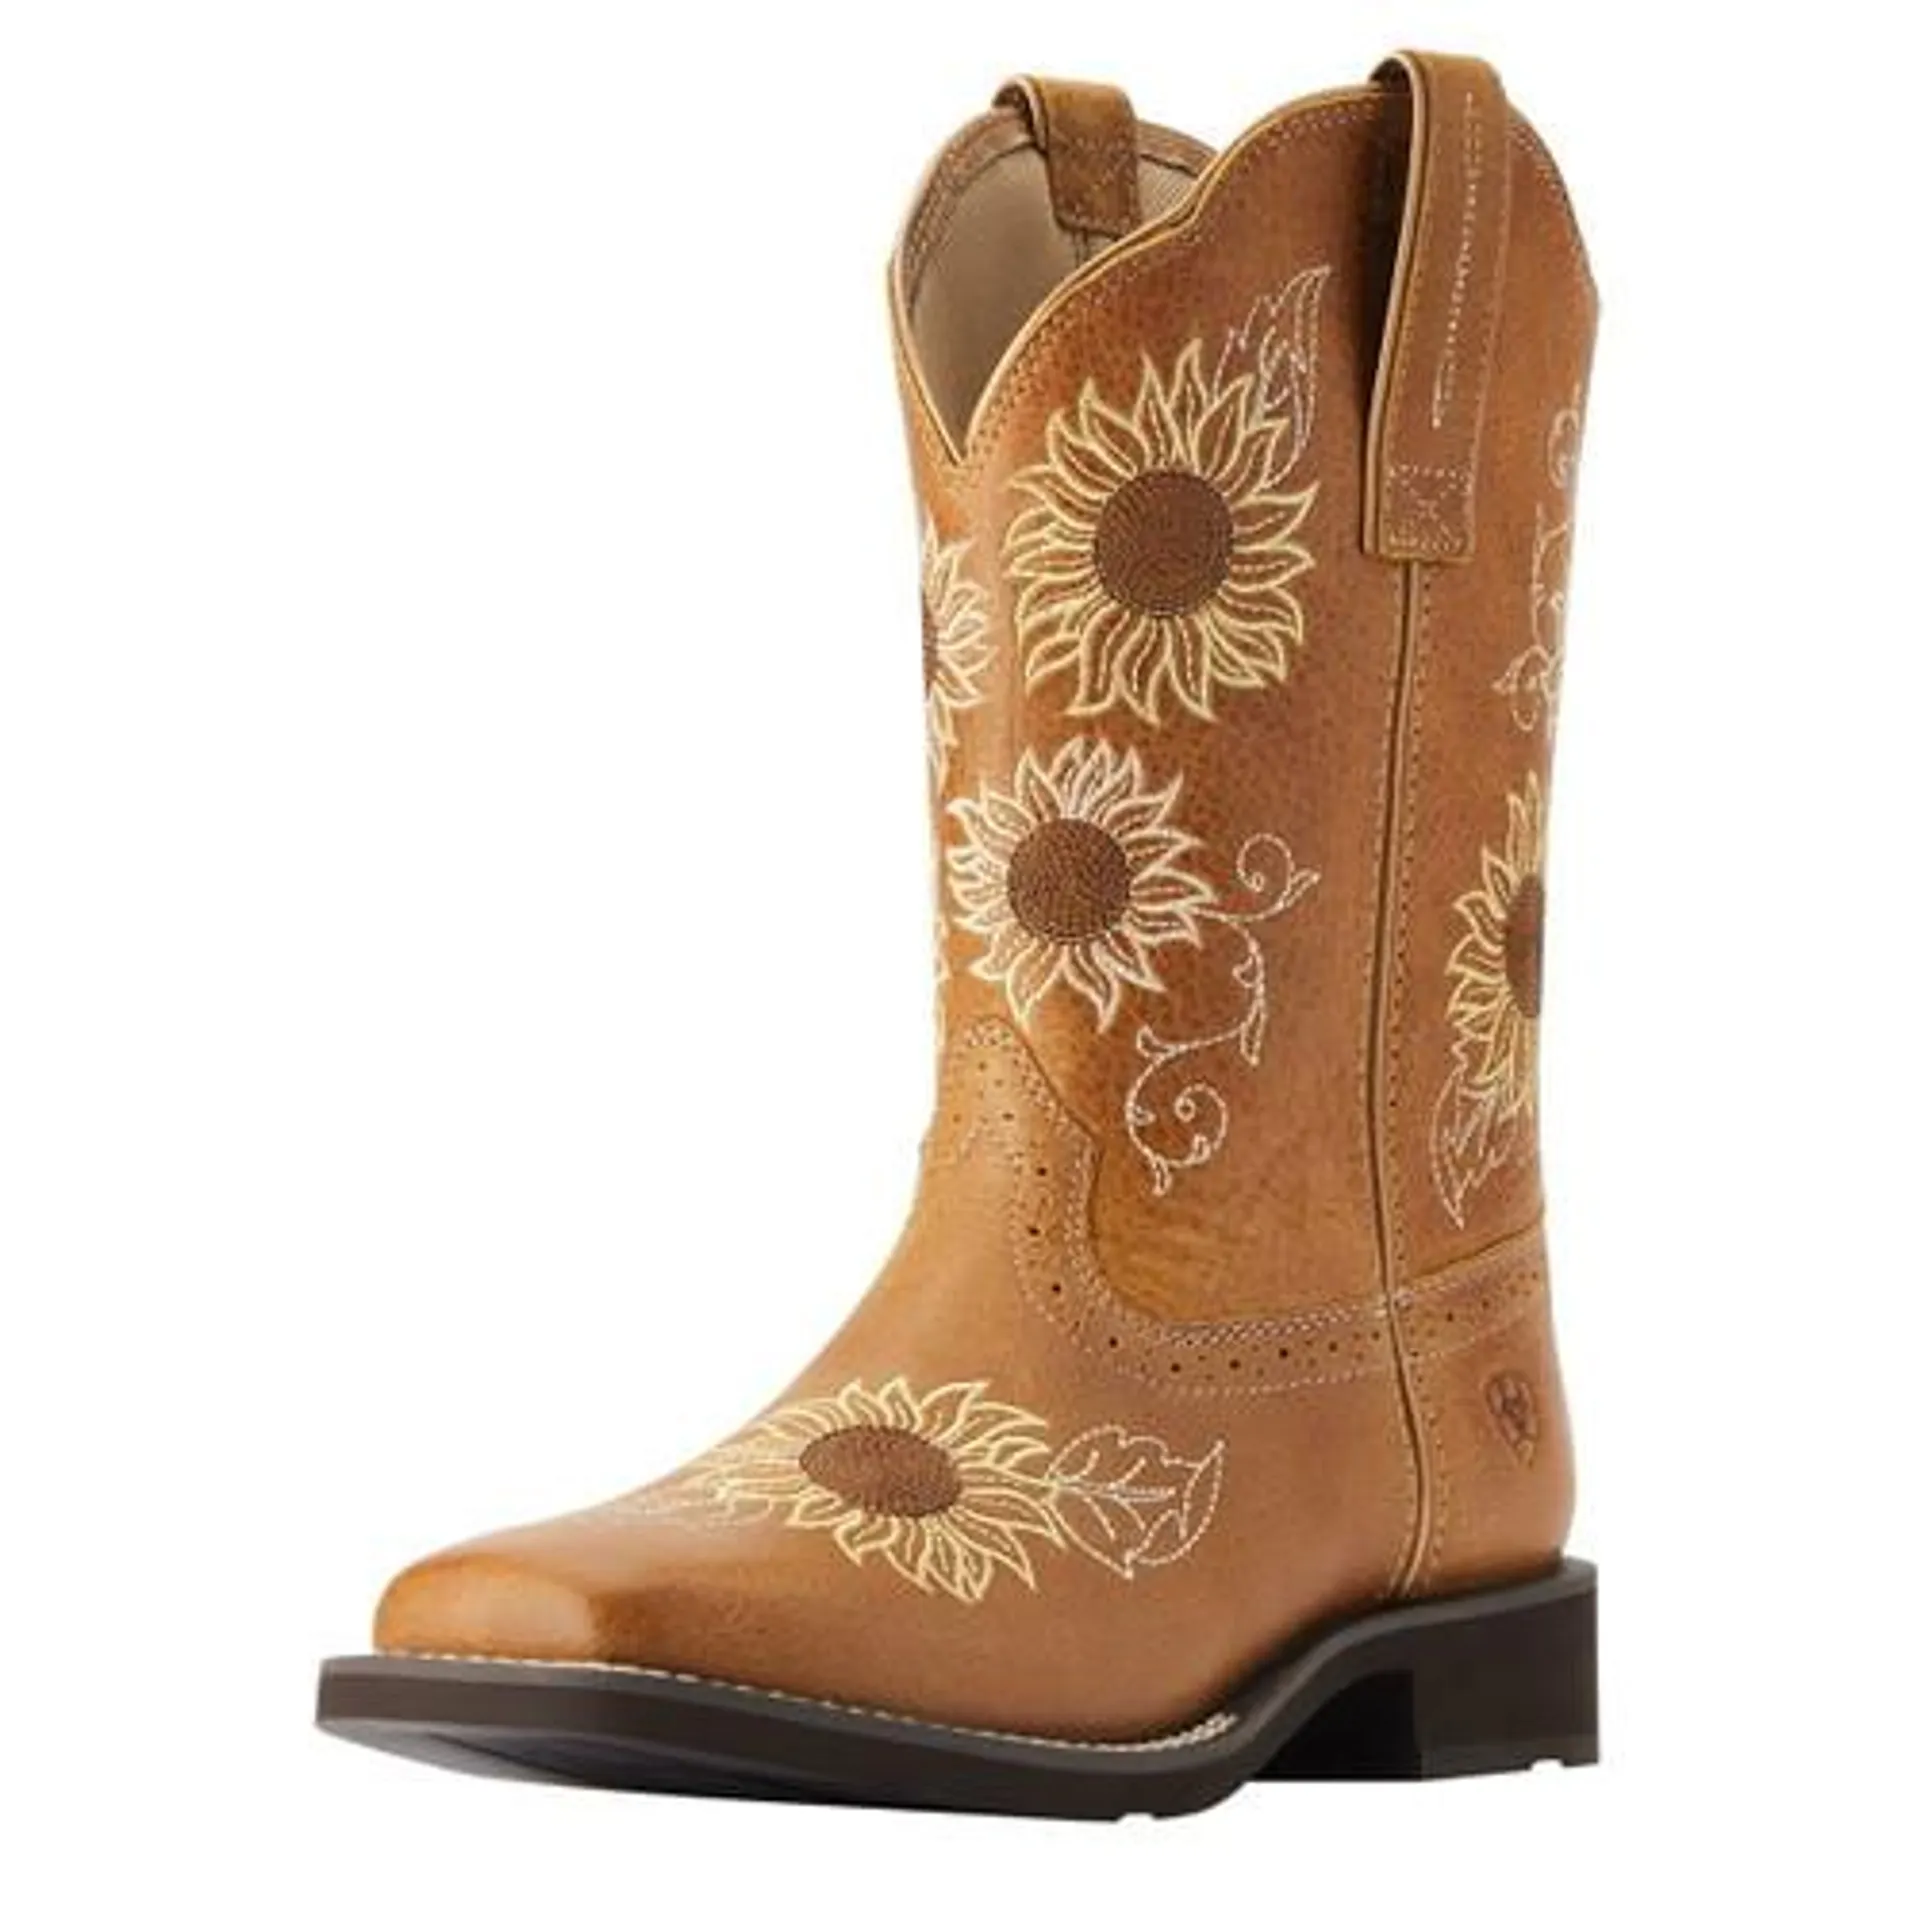 Ariat Womens Sanded Tan Heartland Blossom Fatbaby Square Toe Boots